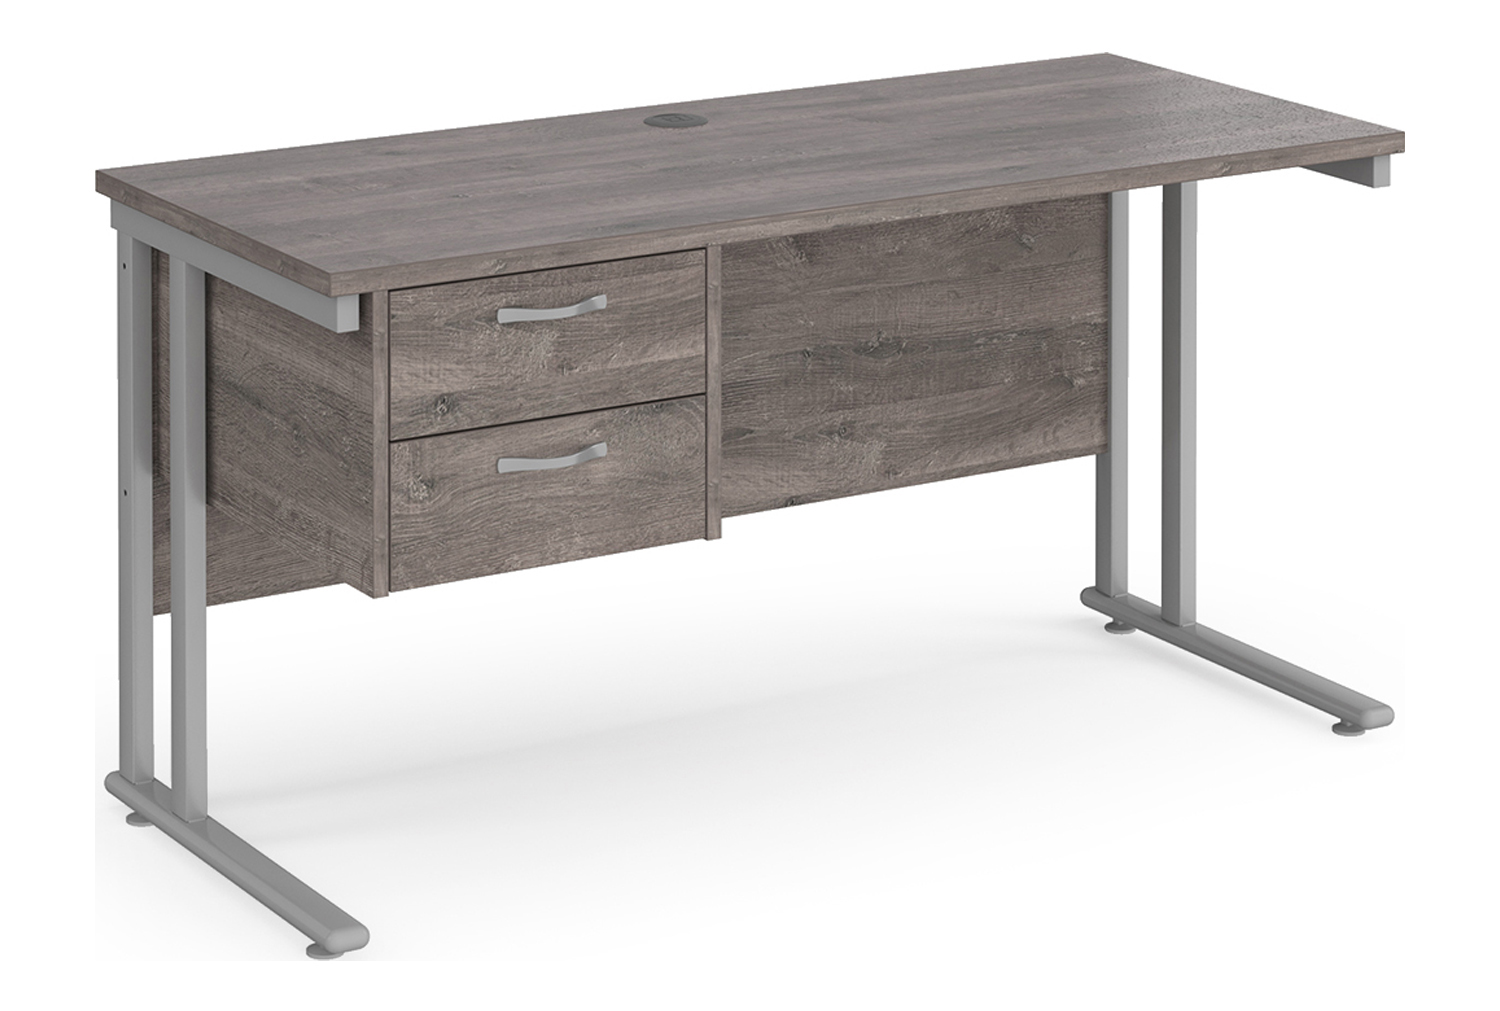 Value Line Deluxe C-Leg Narrow Rectangular Office Desk 2 Drawers (Silver Legs), 140wx60dx73h (cm), Grey Oak, Express Delivery